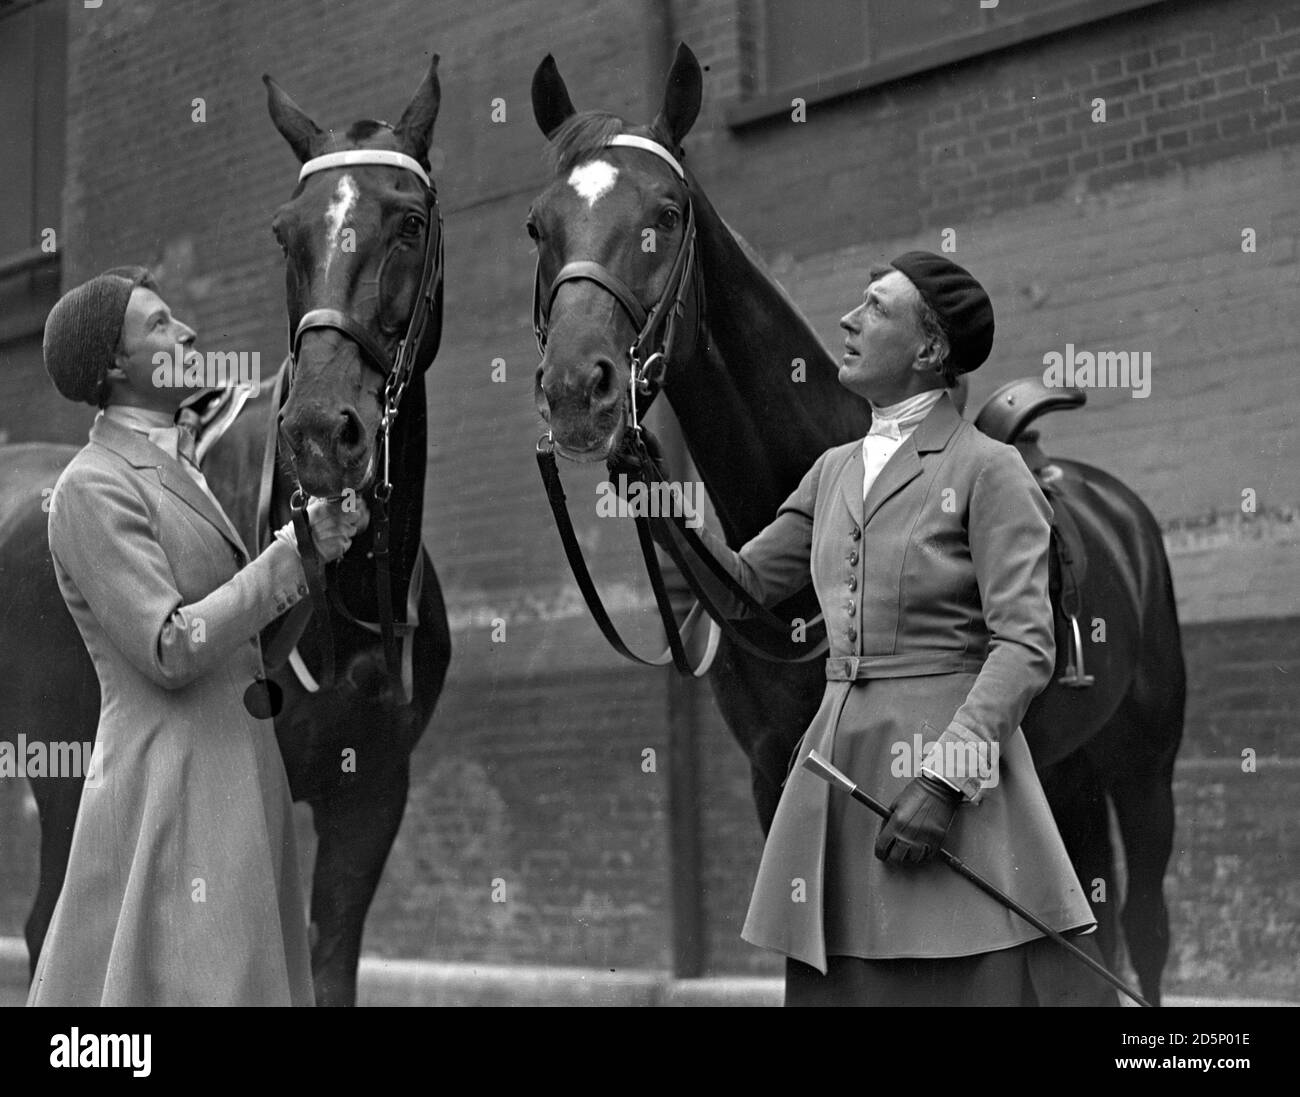 Frau Duensing (l) and Frau von Loebbecke, two German women competitors in the International Horse Show at Olympia, London. Stock Photo